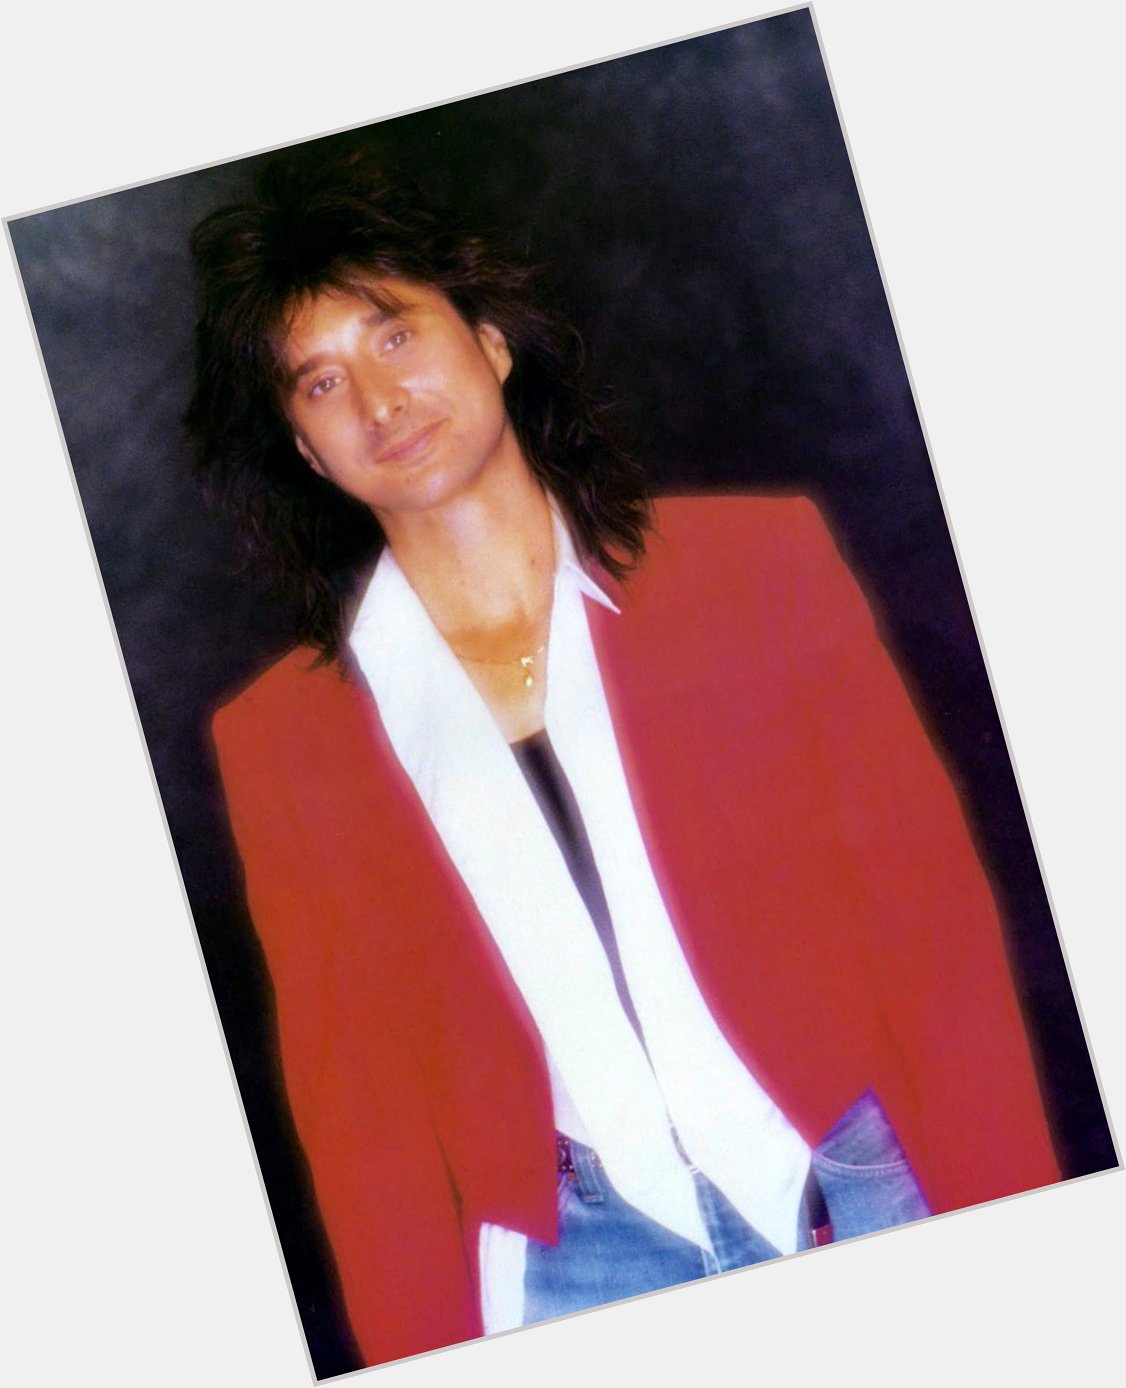 Wishing a very Happy Birthday to \"The Voice\" Steve Perry!  